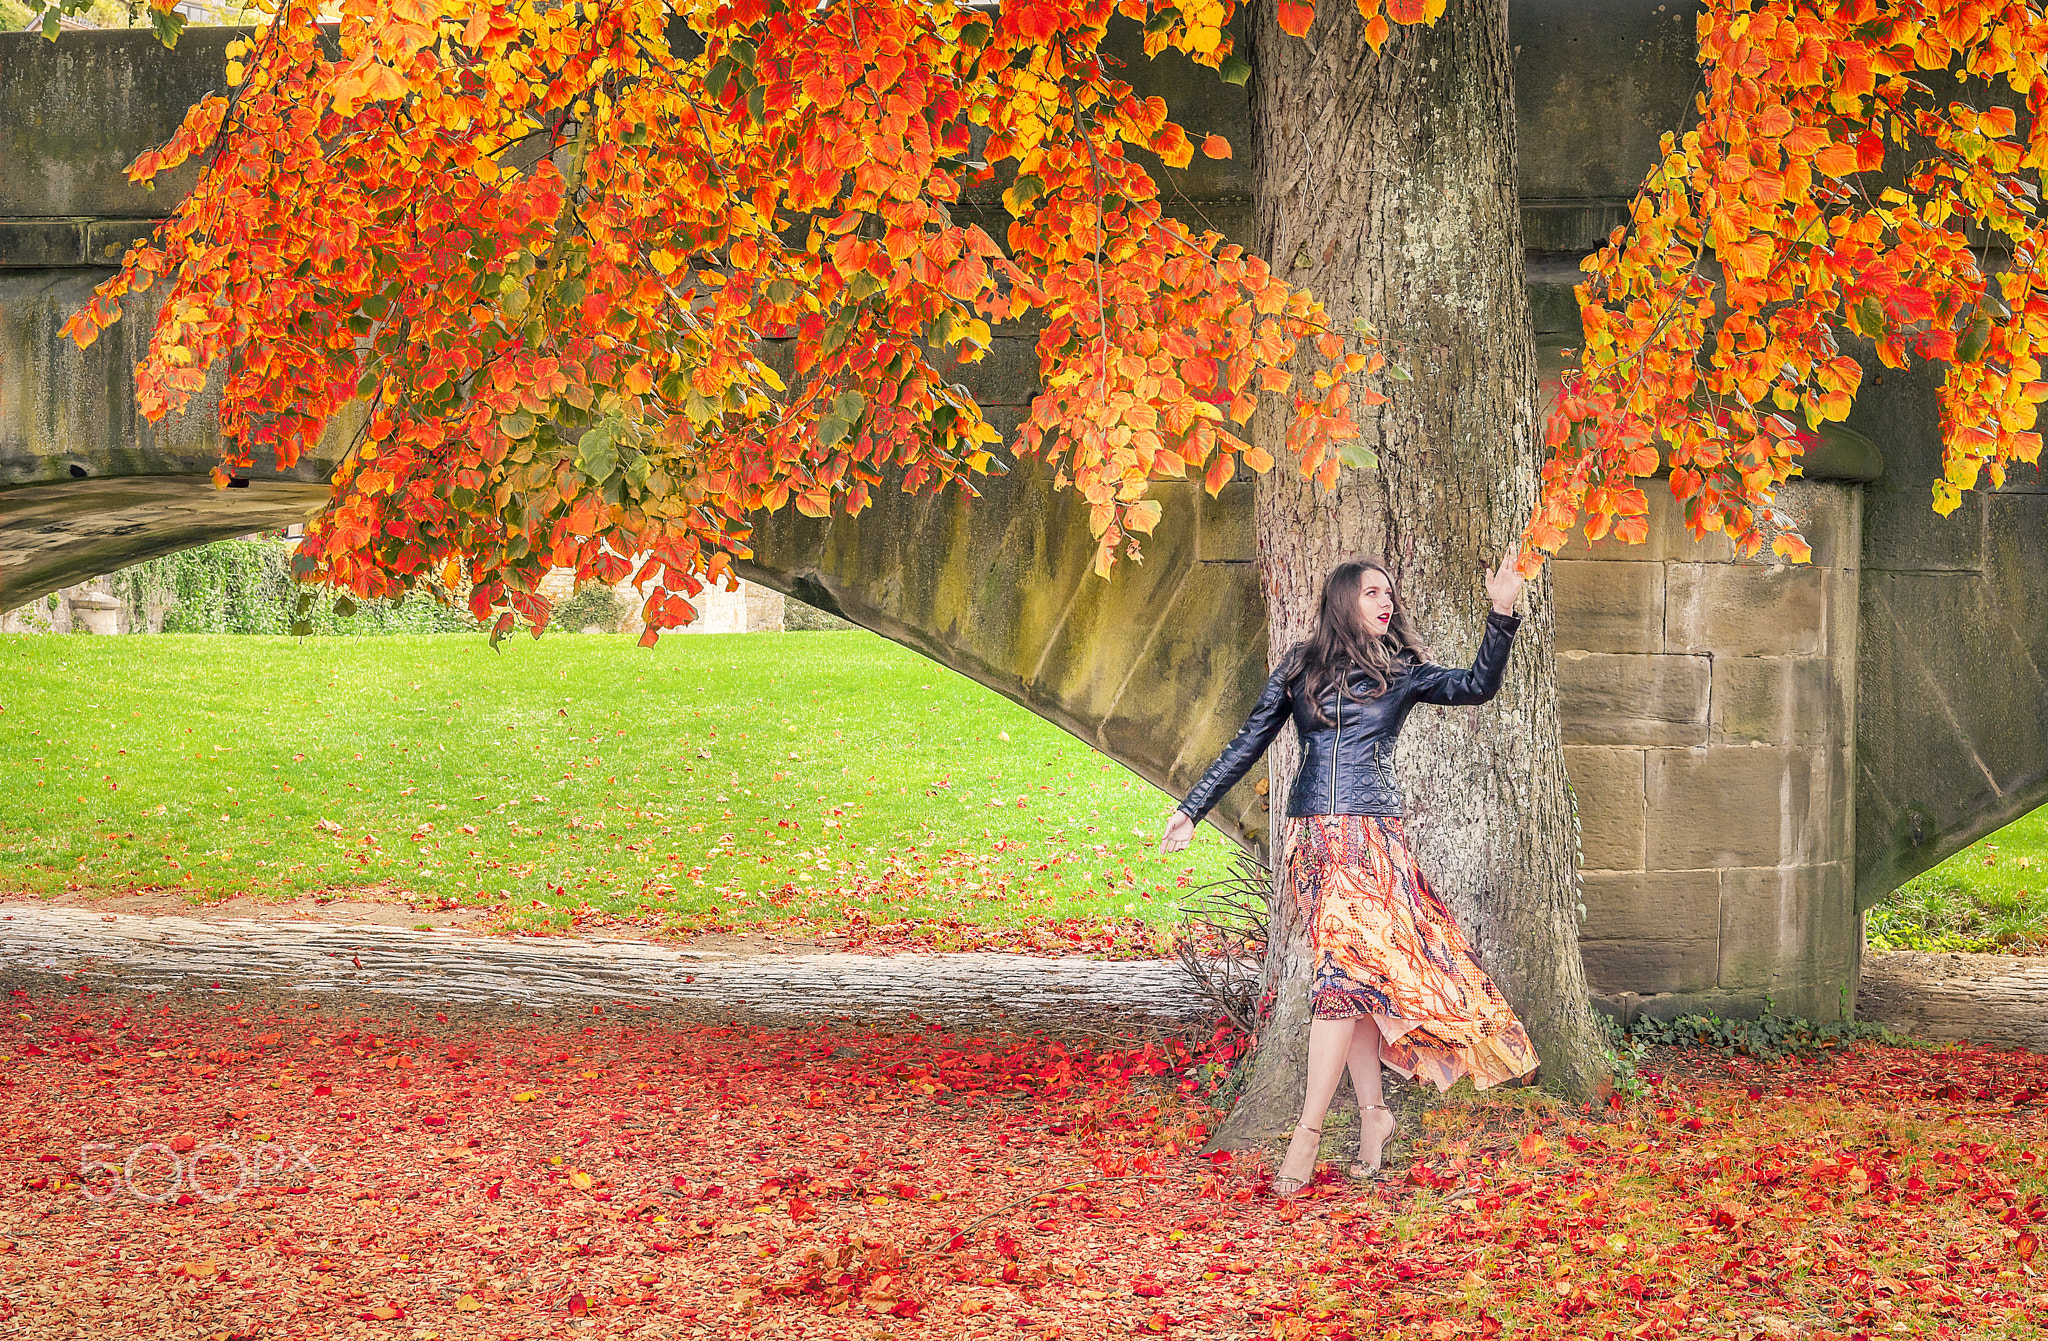 Woman reaching the autumn colored leaves